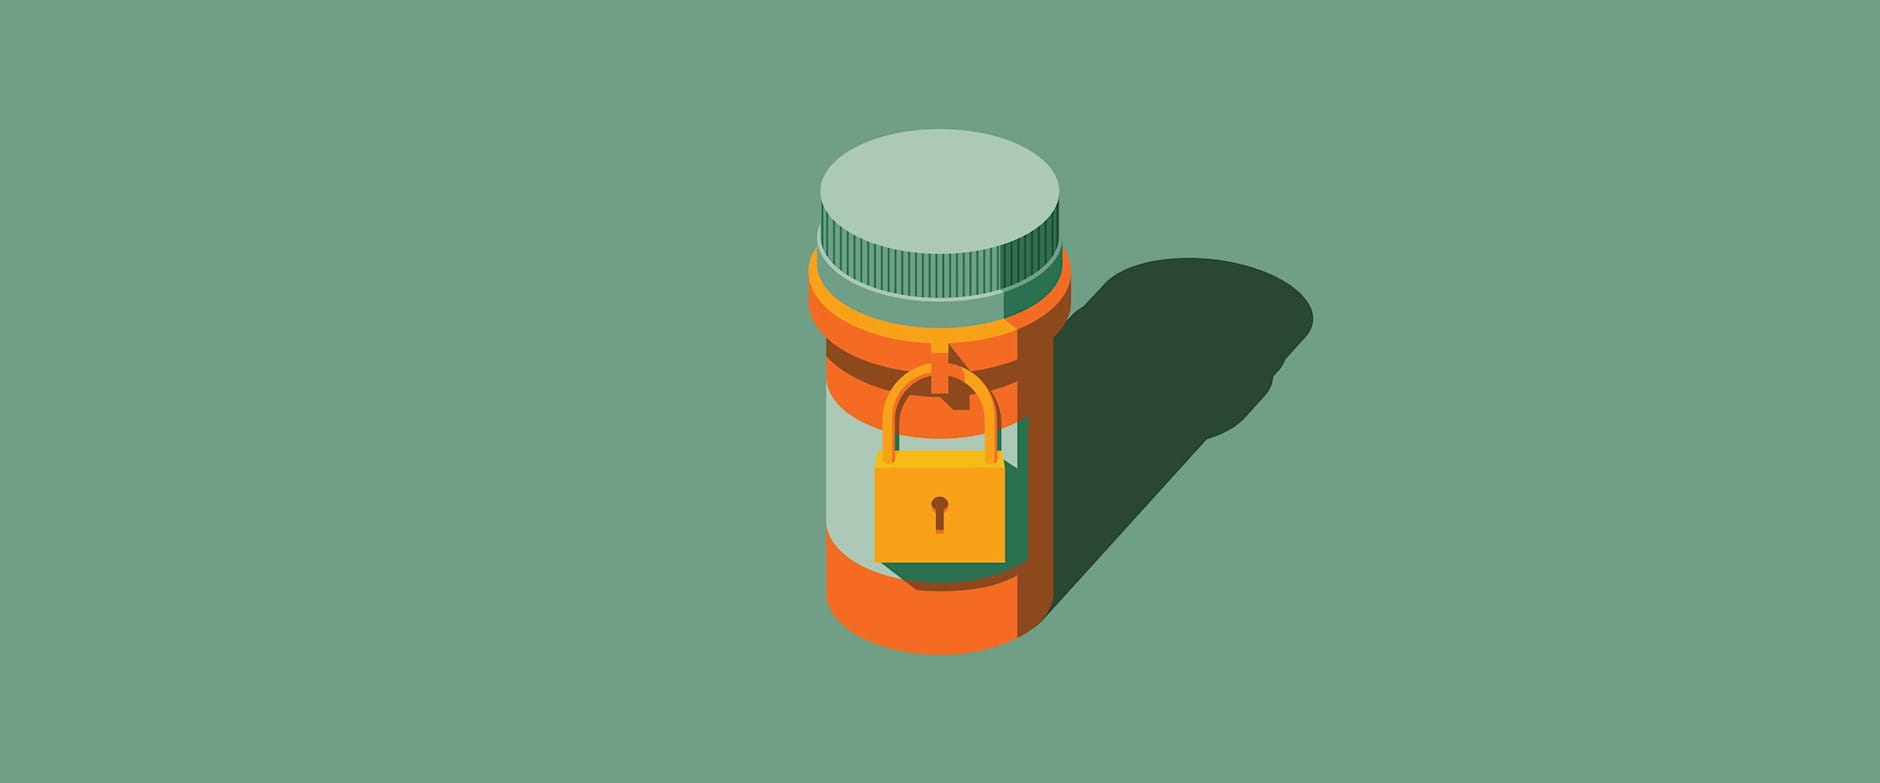 Illustration of a prescription pill canister with a lock on it